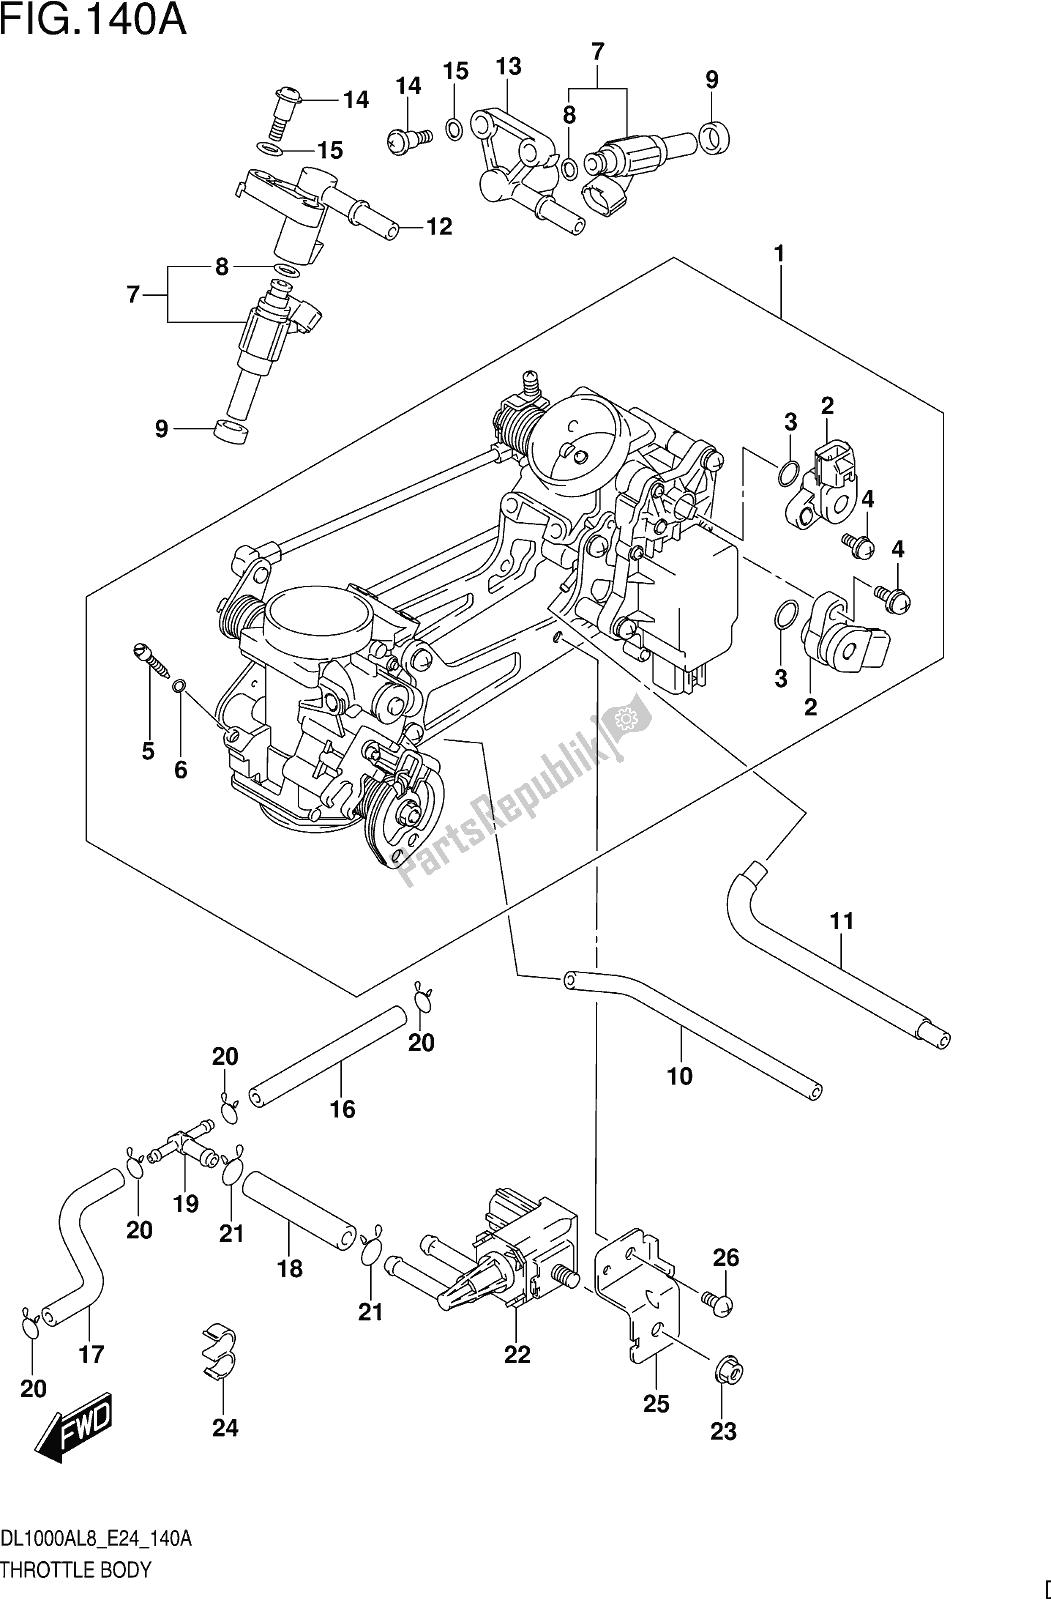 All parts for the Fig. 140a Throttle Body of the Suzuki DL 1000 XA 2018